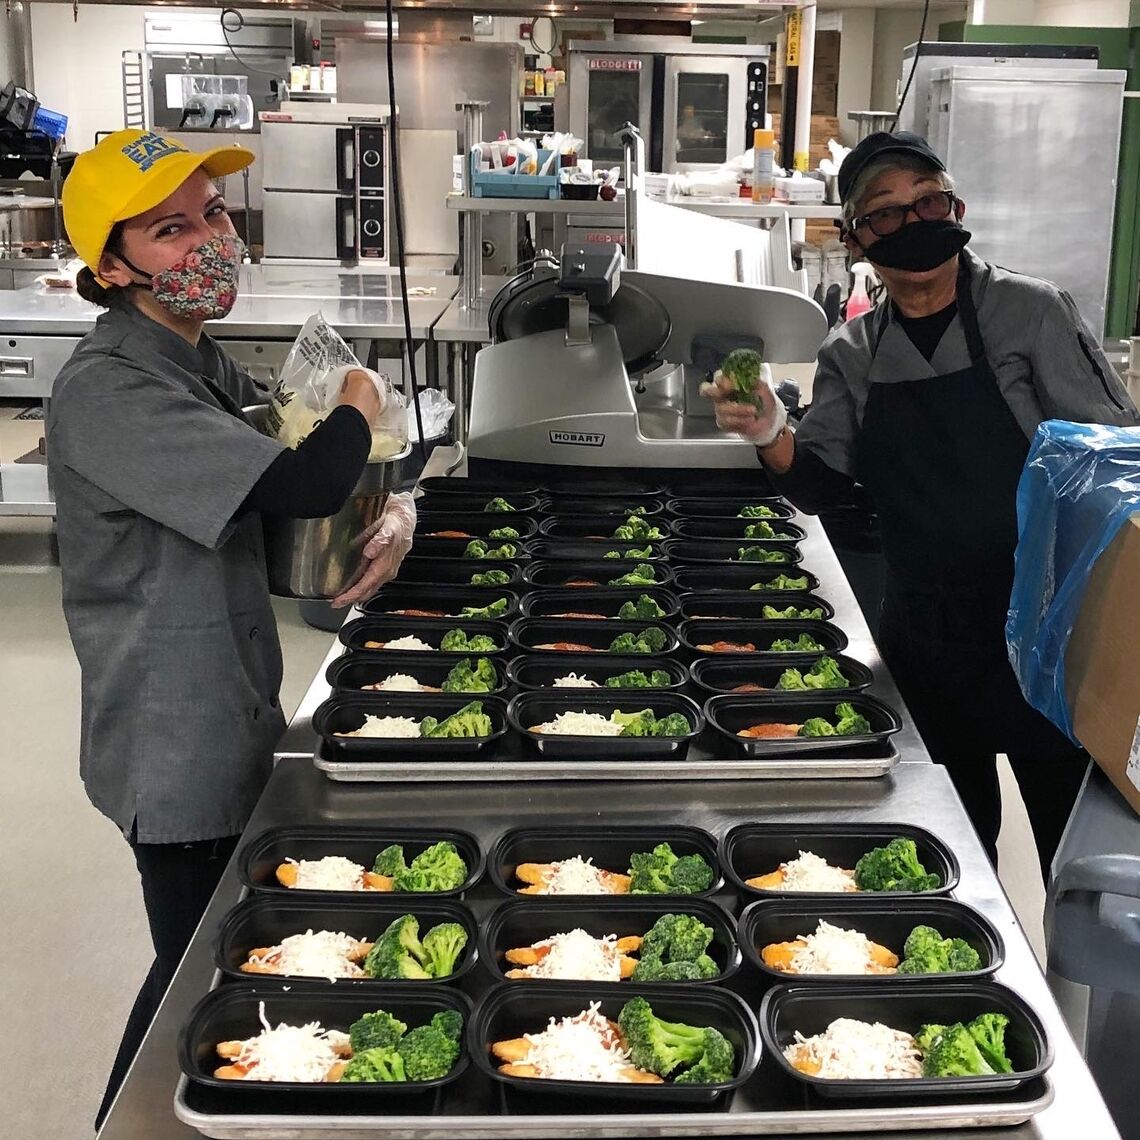 Two school nutrition professionals working hard to prepare school meals for kids through pandemic